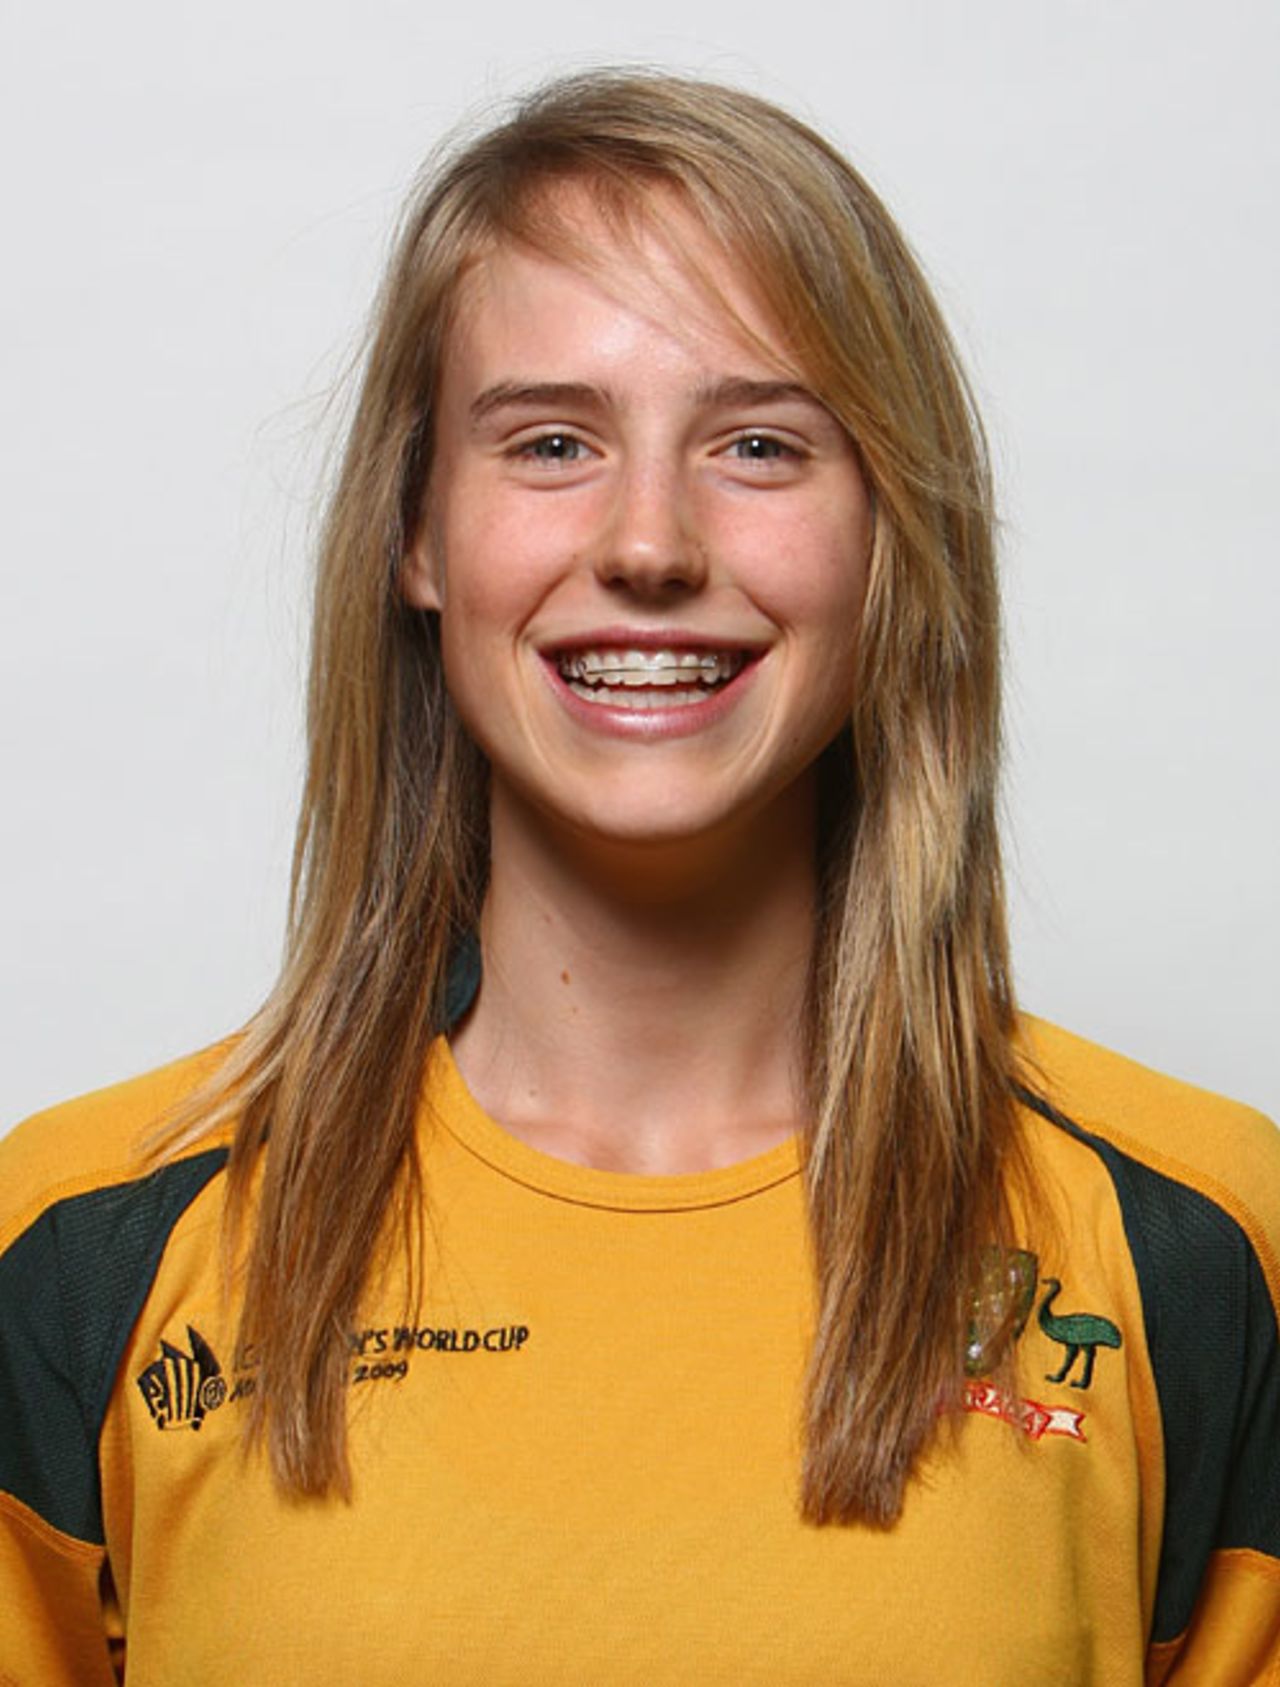 Ellyse Perry, player portrait, March 3, 2009